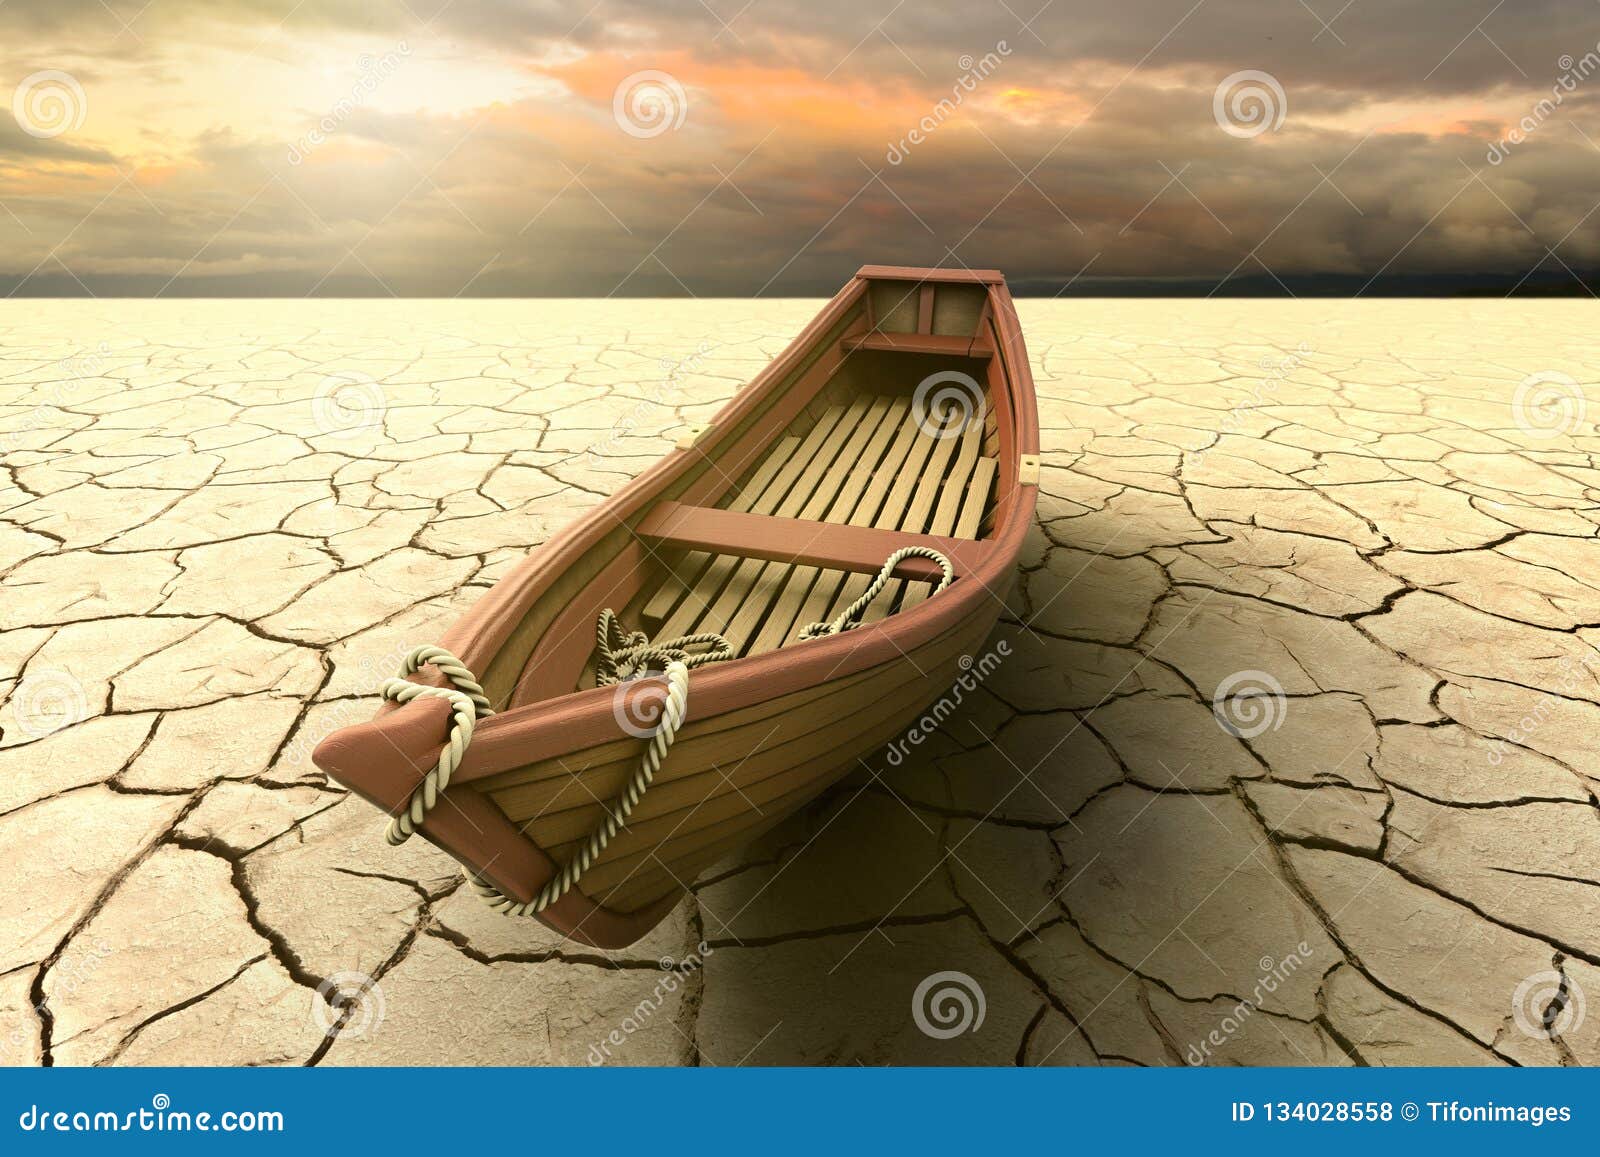 conceptual representation of a drought with a boat on a dry lake